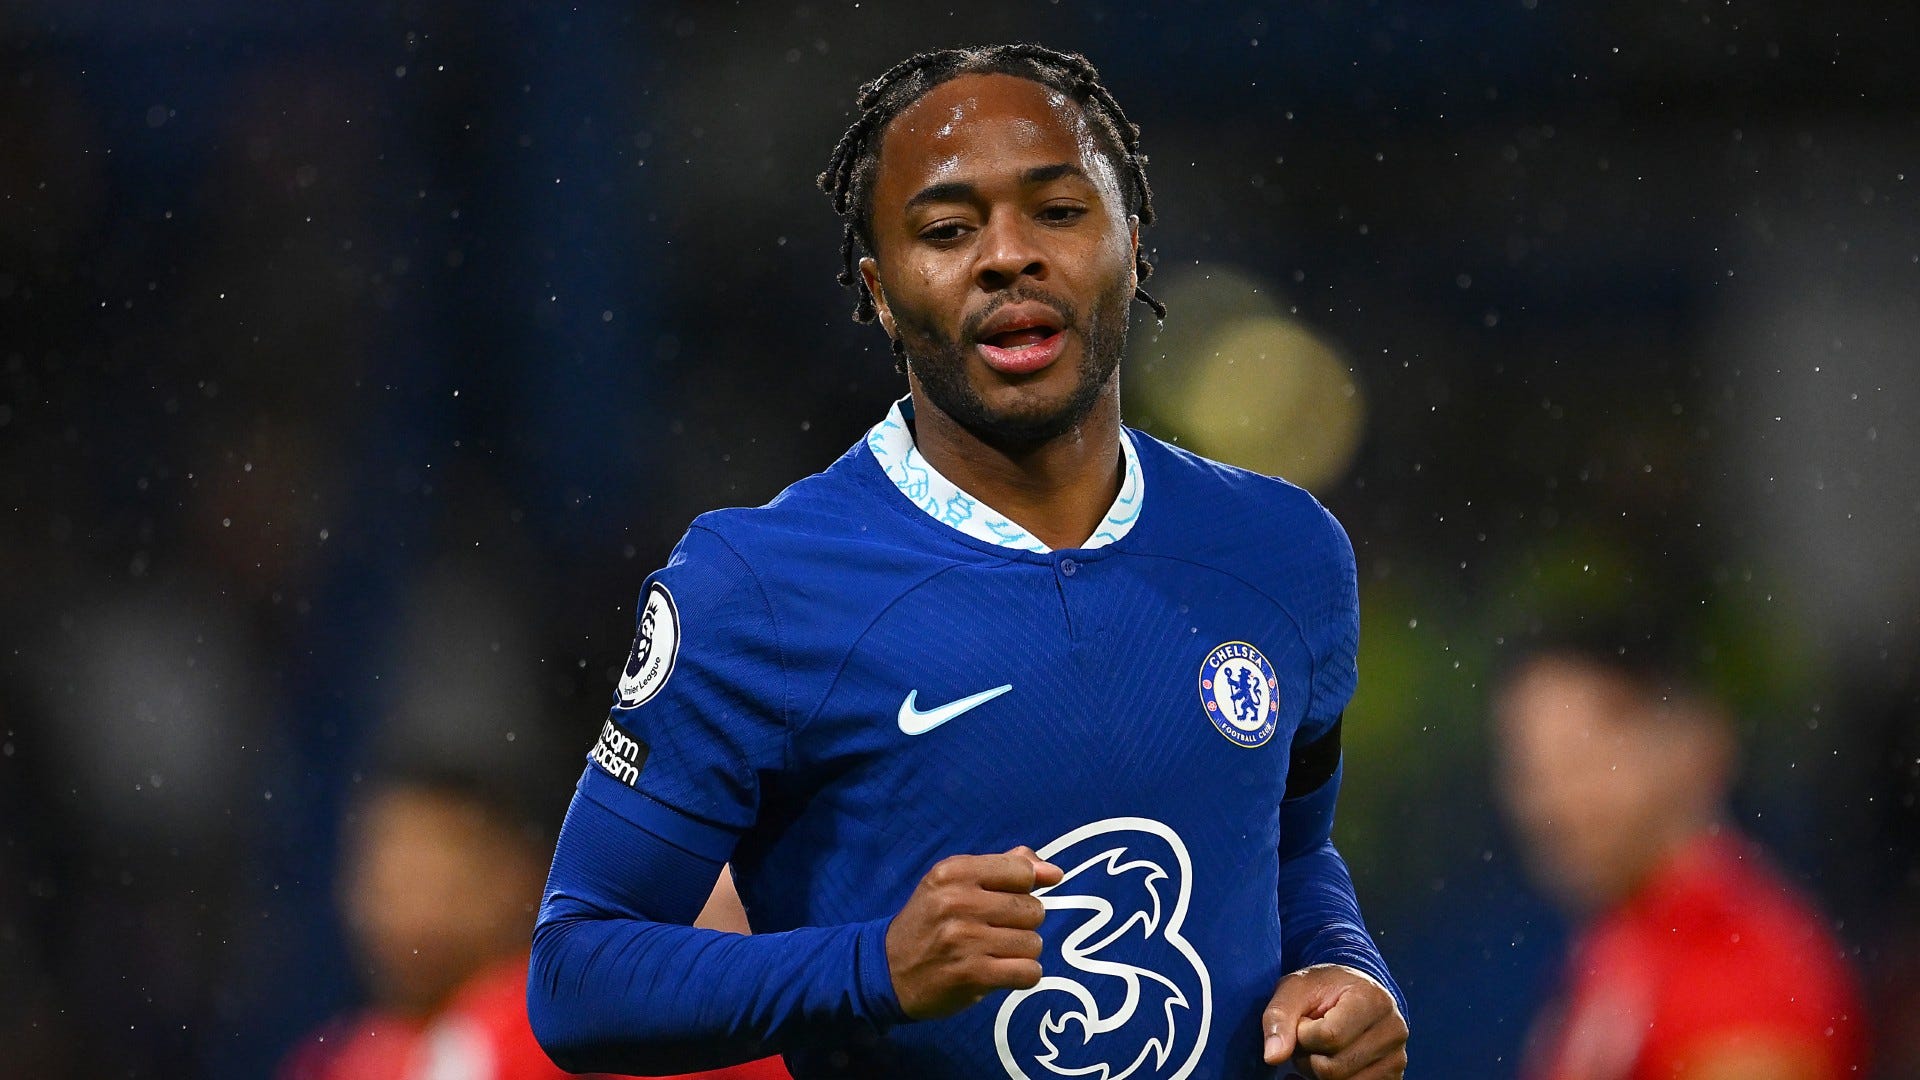 When did Chelsea forward Raheem Sterling last fail to hit double figures for goals scored?